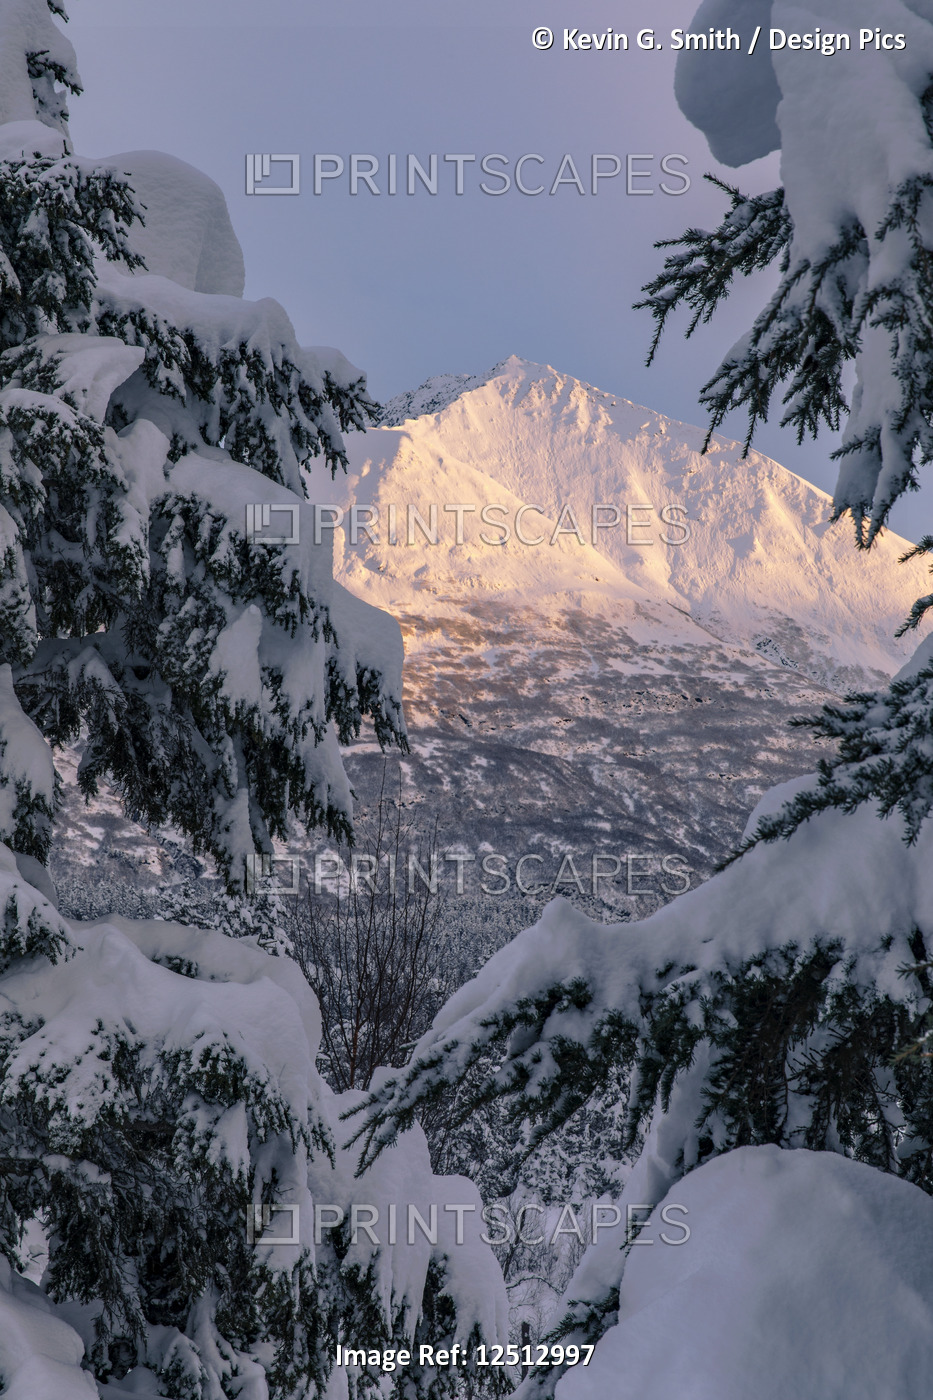 Sunlight illuminating a snow-covered mountains with evergreen branches laden ...